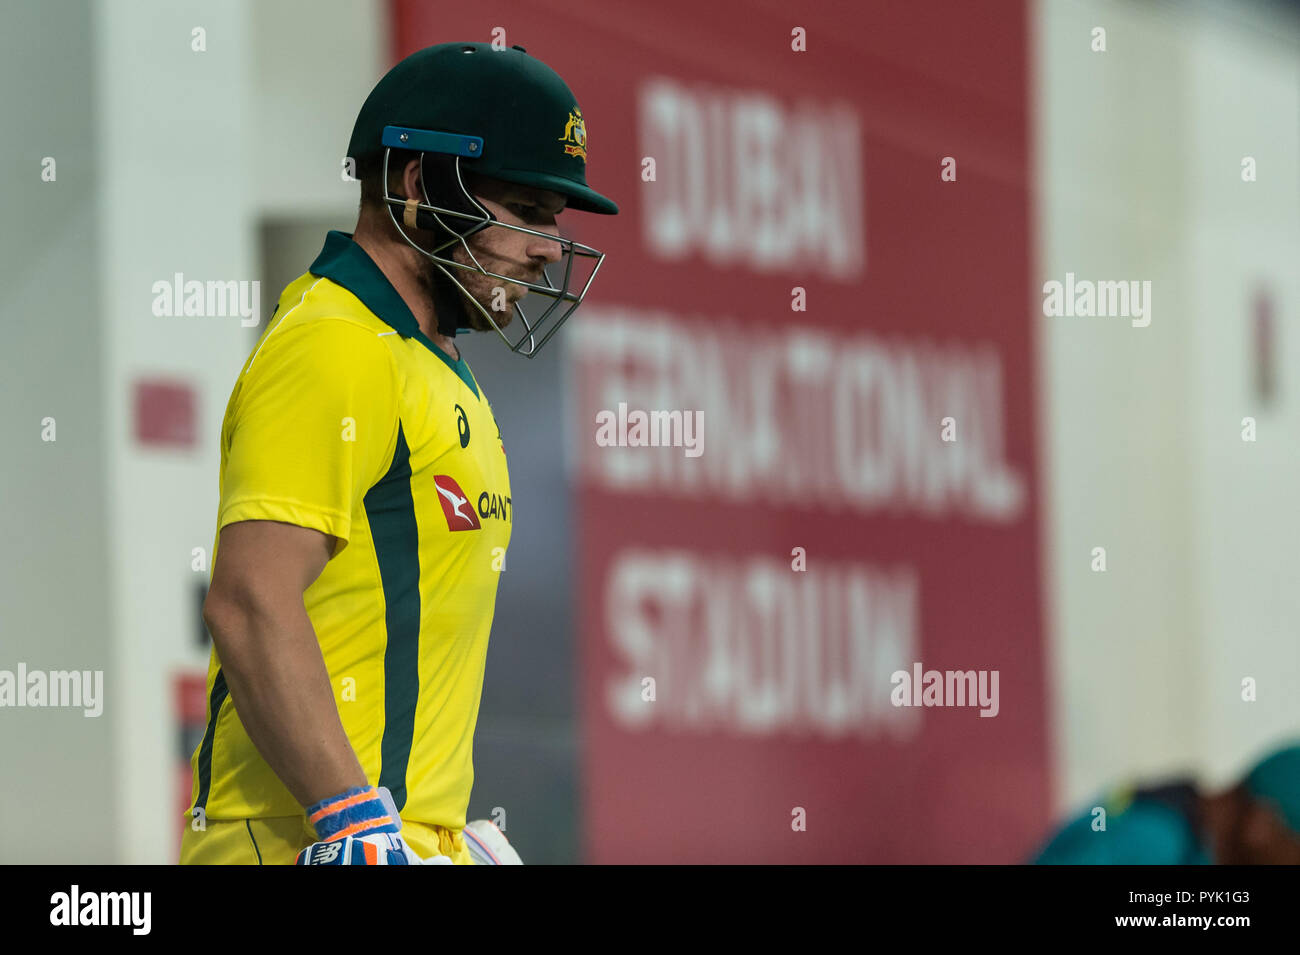 Dubai, UAE. 28th Oct, 2018. Aaron Finch, Captain of Australia waits to go in to bat during the 3rd T20 International between Pakistan and Australia at the Dubai International stadium, Dubai, UAE on 28 October 2018. Photo by Grant Winter. Credit: UK Sports Pics Ltd/Alamy Live News Stock Photo